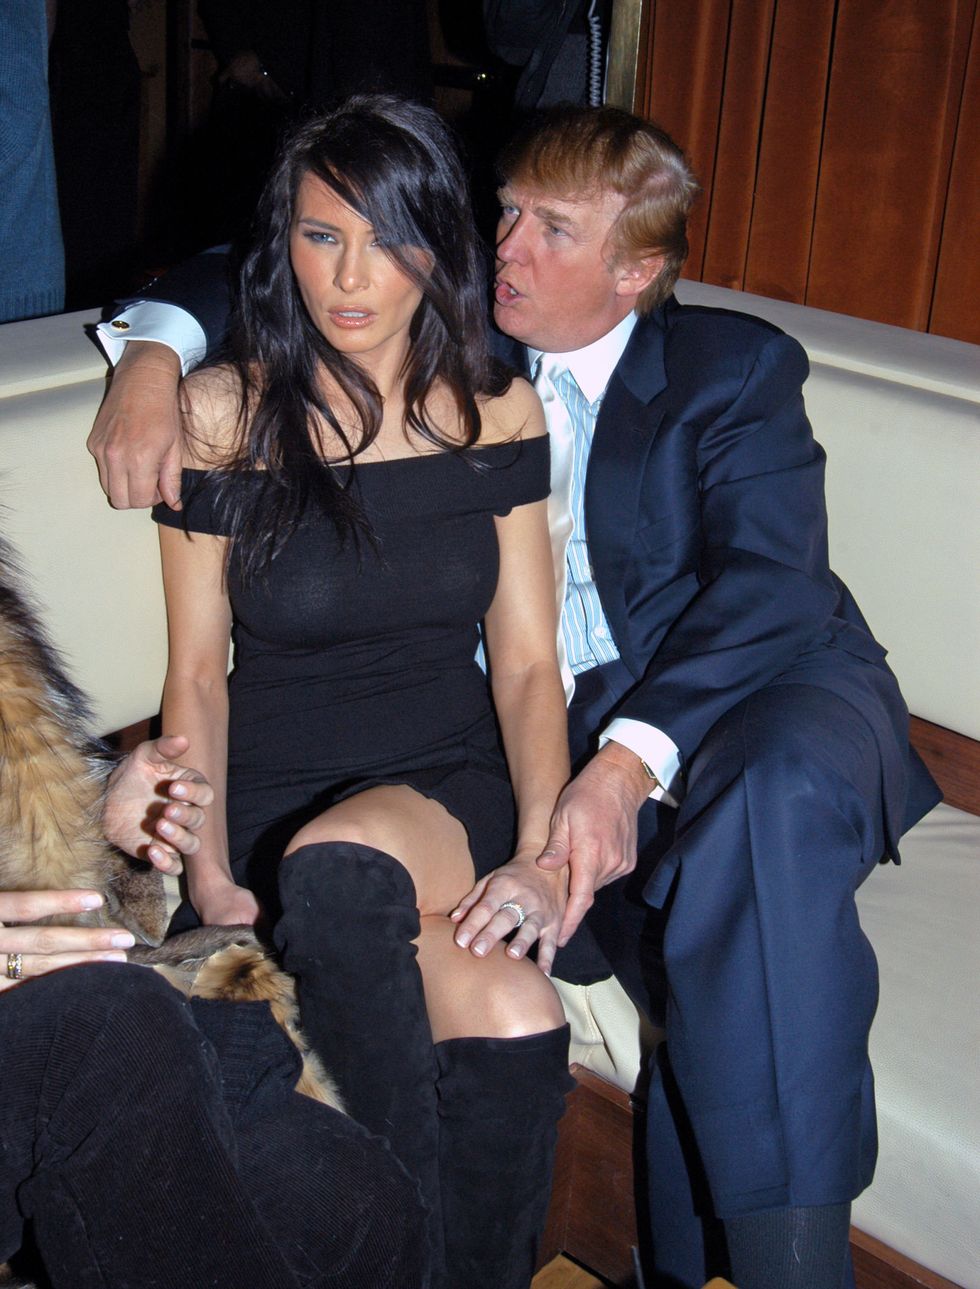 Donald Trump sits close to his girlfriend Melania Knaus at the Men's Health Magazine Bash for the 50th Birthday of Page Six Editor Richard Johnson held at Marquee